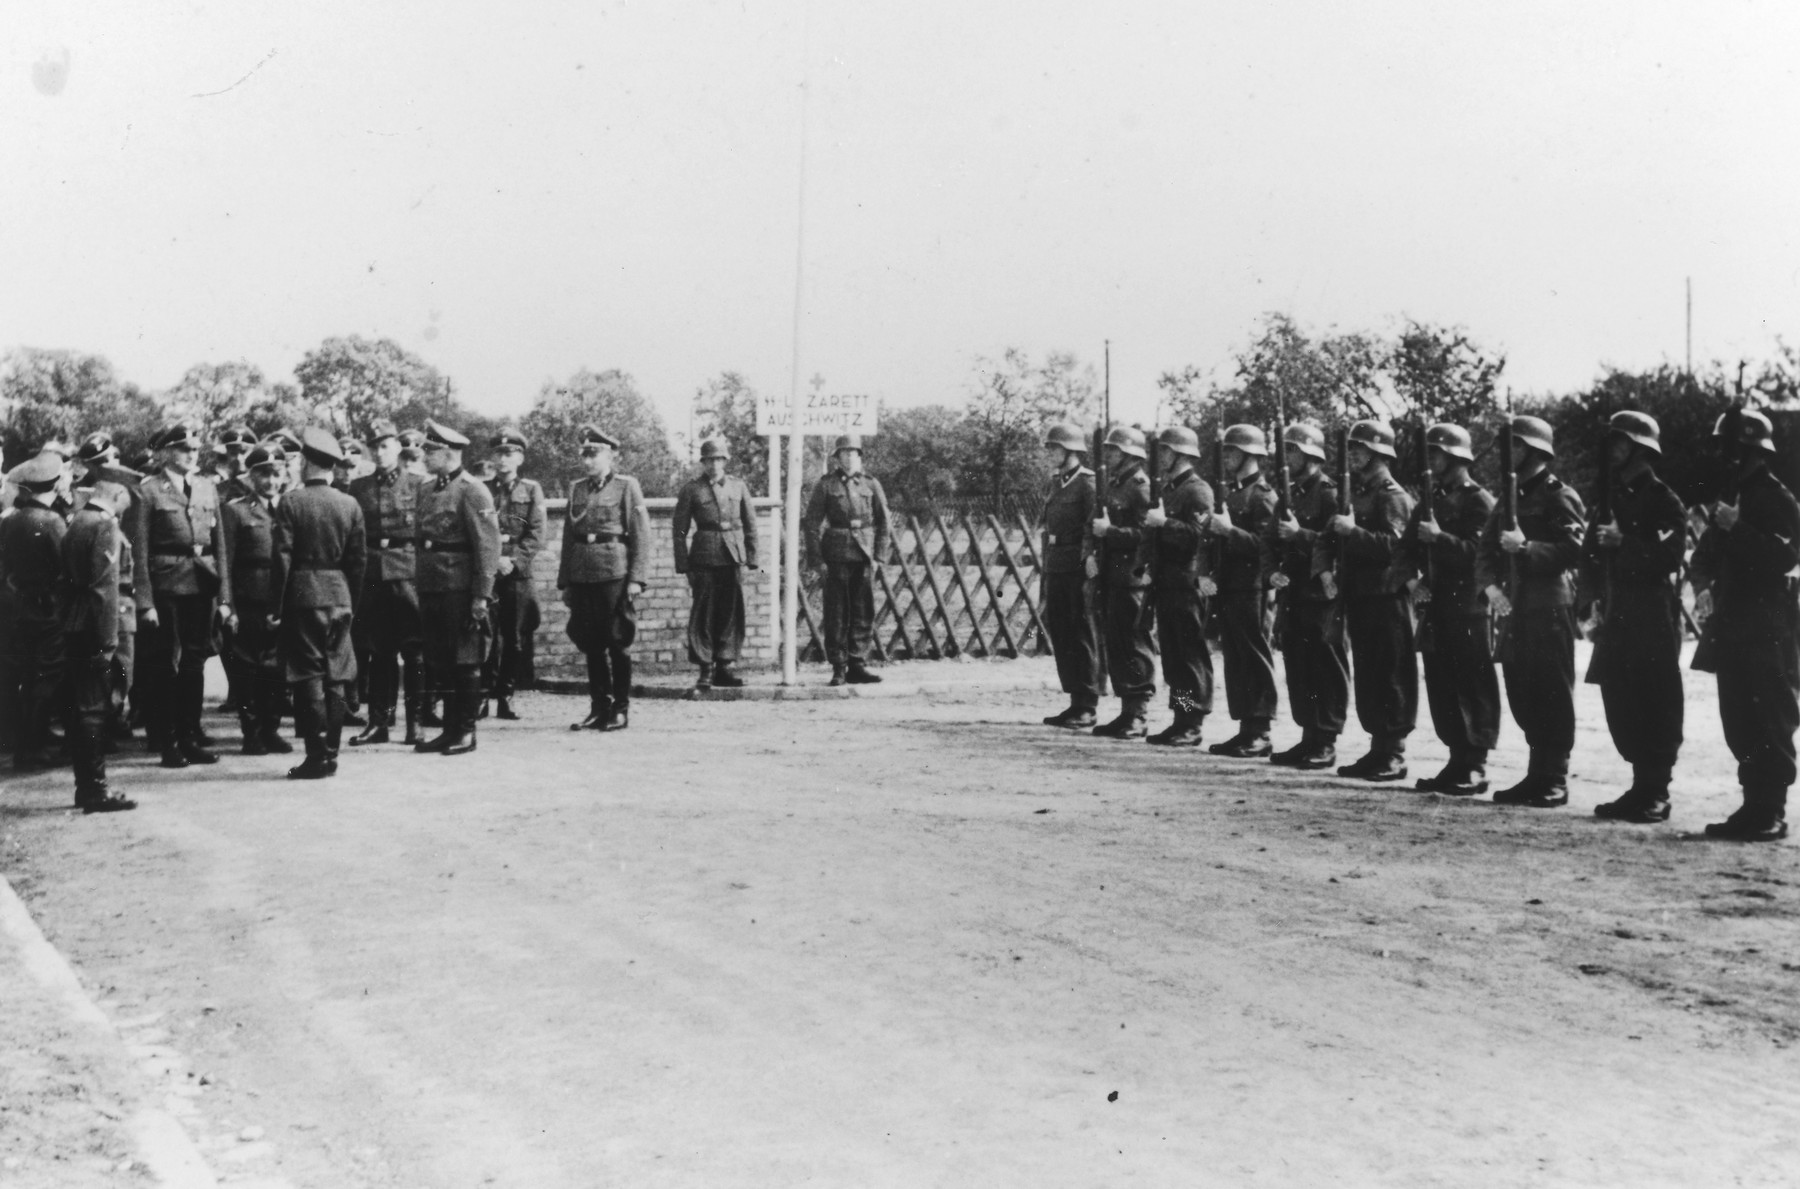 Dedication of the new SS hospital in Auschwitz. 

The original caption reads "Die Ubergabe" (the handover).  The ceremony marks the transfer of documents and authority from the construction department to the camp upon completion of the project.